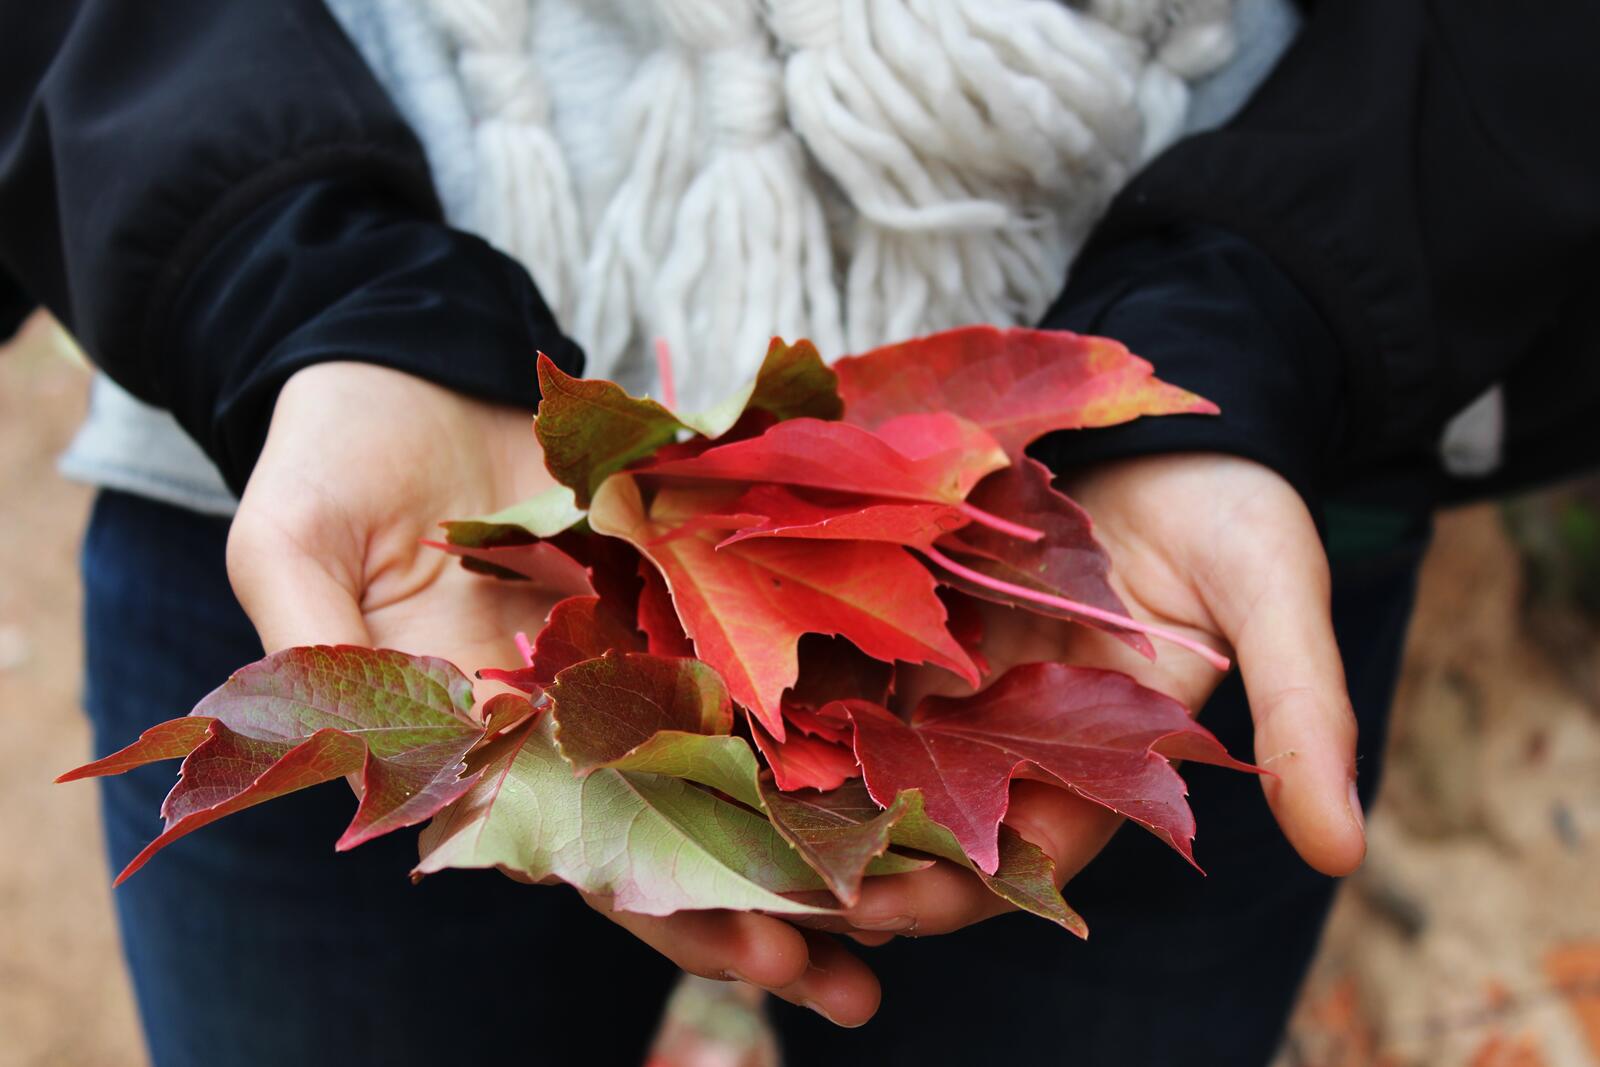 Free photo Autumn fallen maple leaves in the hands of a girl